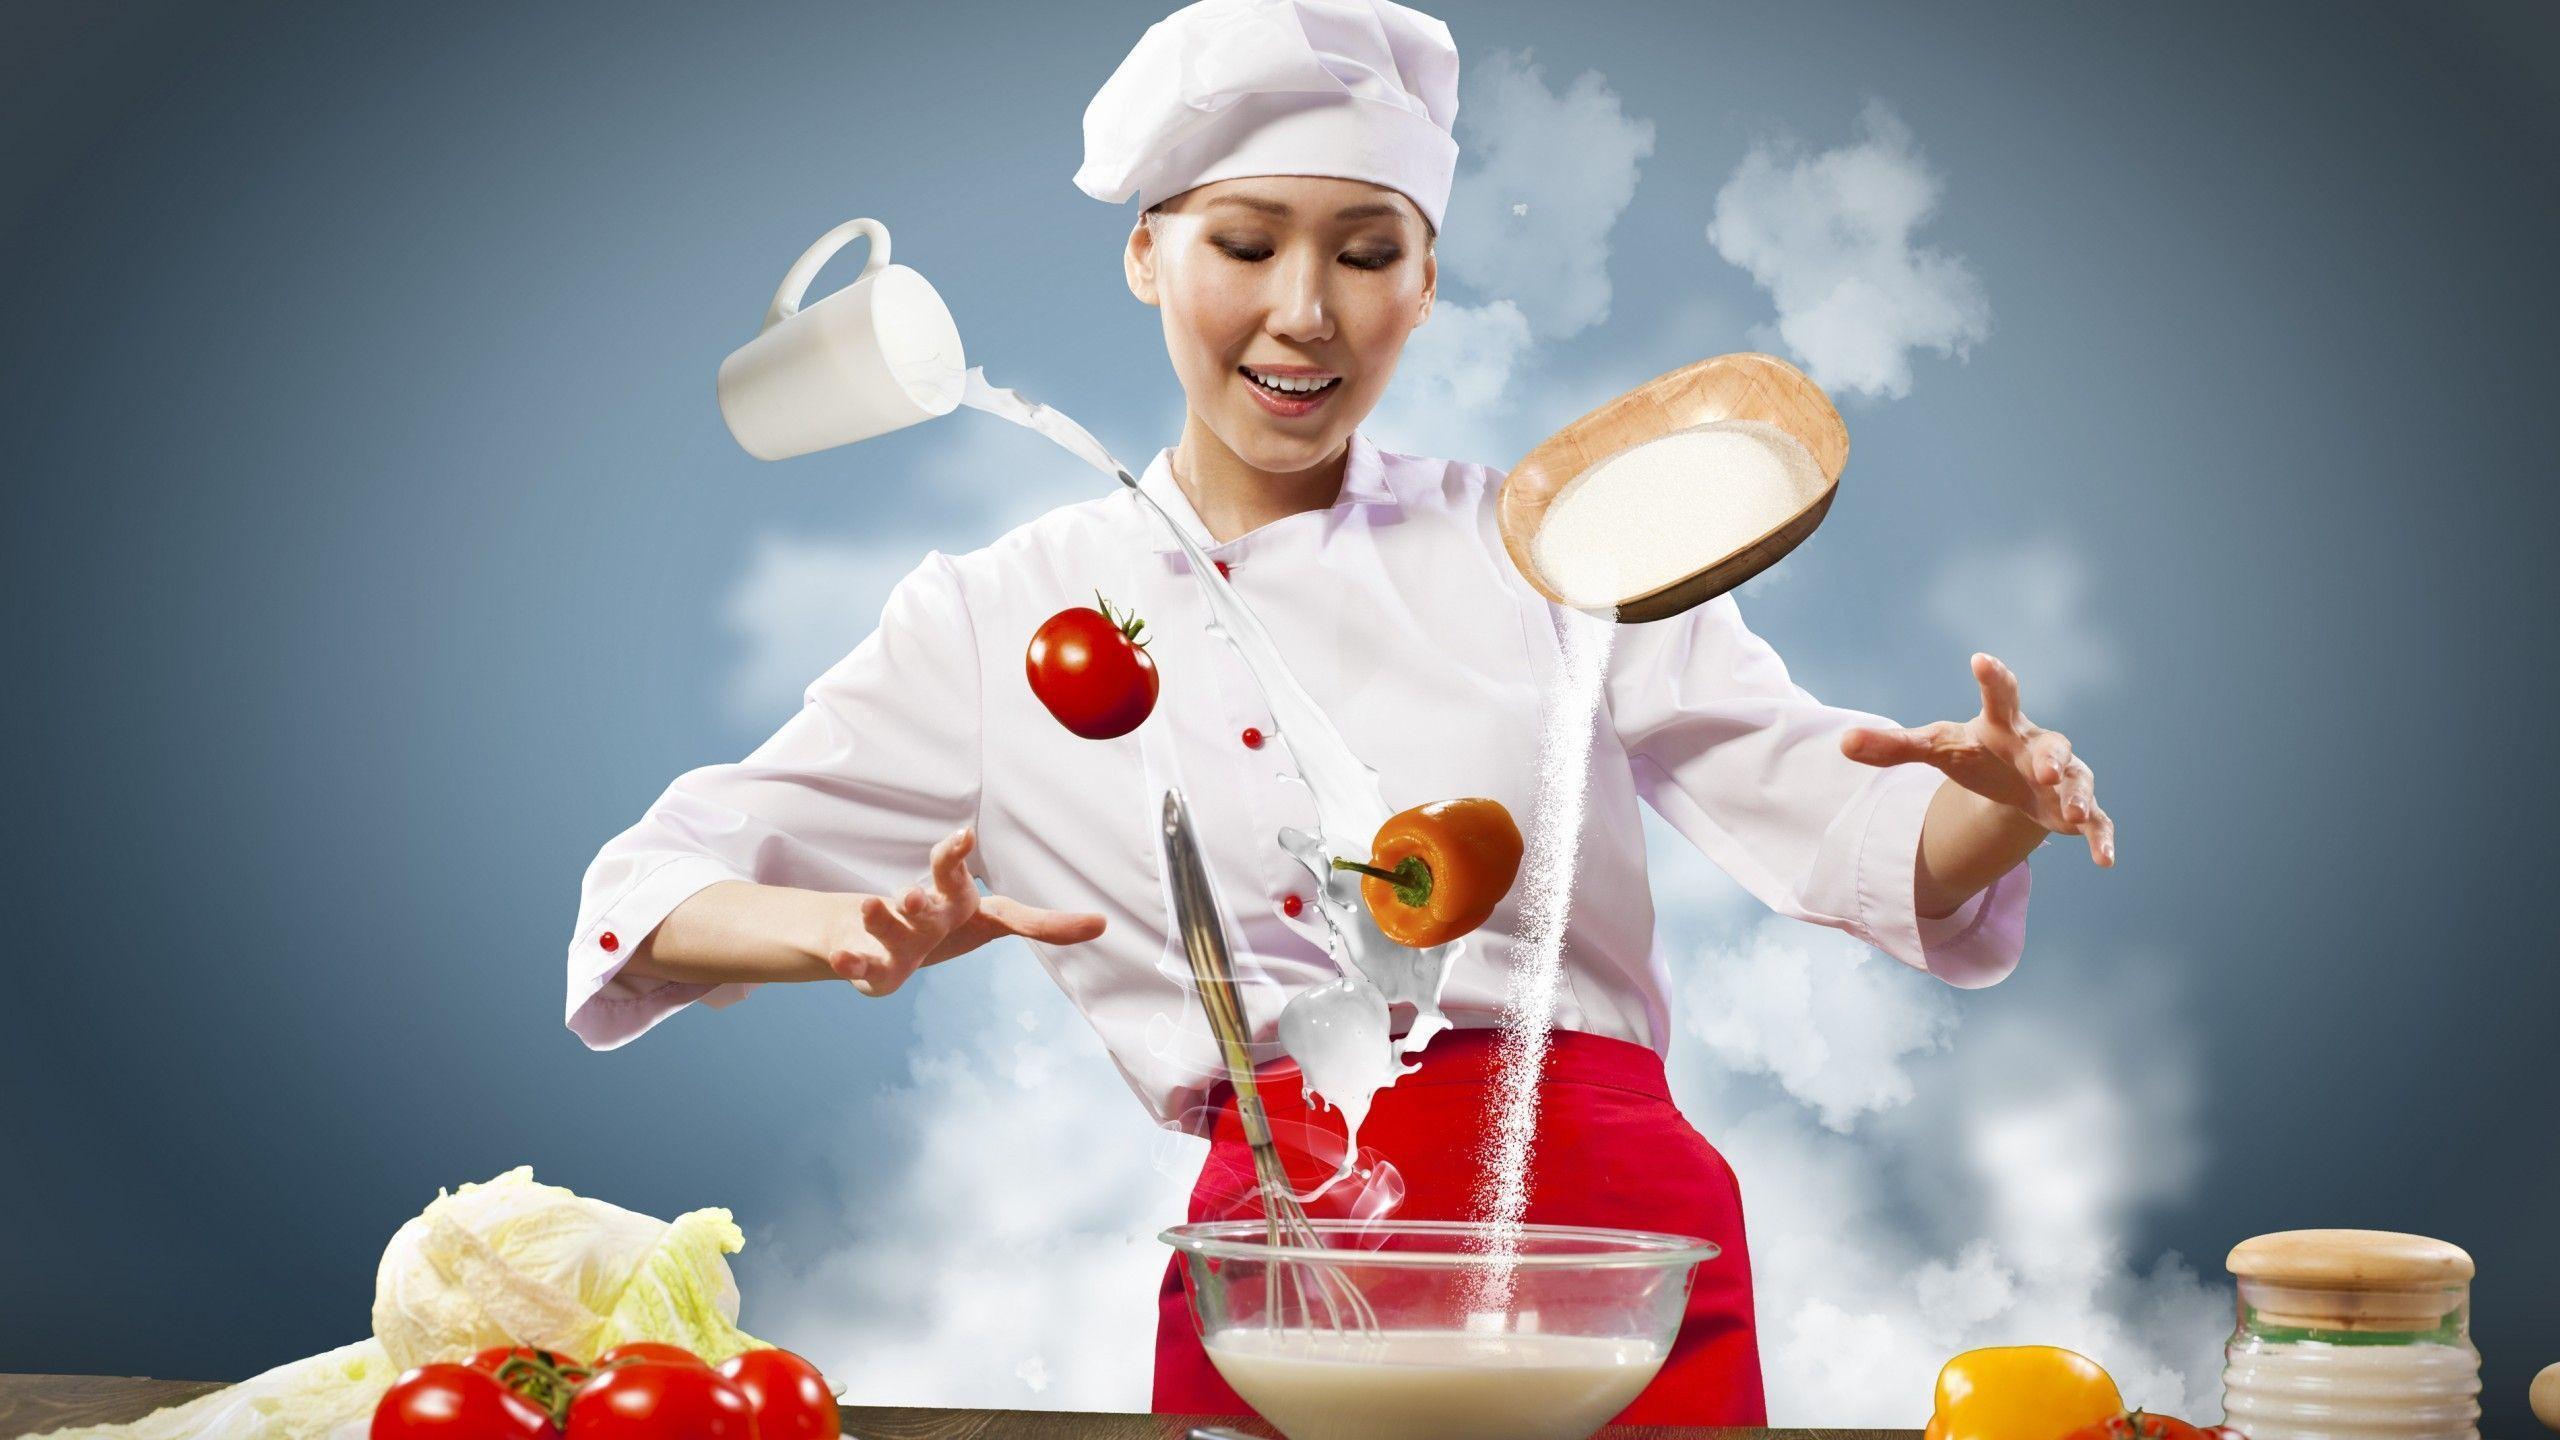 Chef Wallpaper, Top Beautiful Chef Image, 65 High Quality